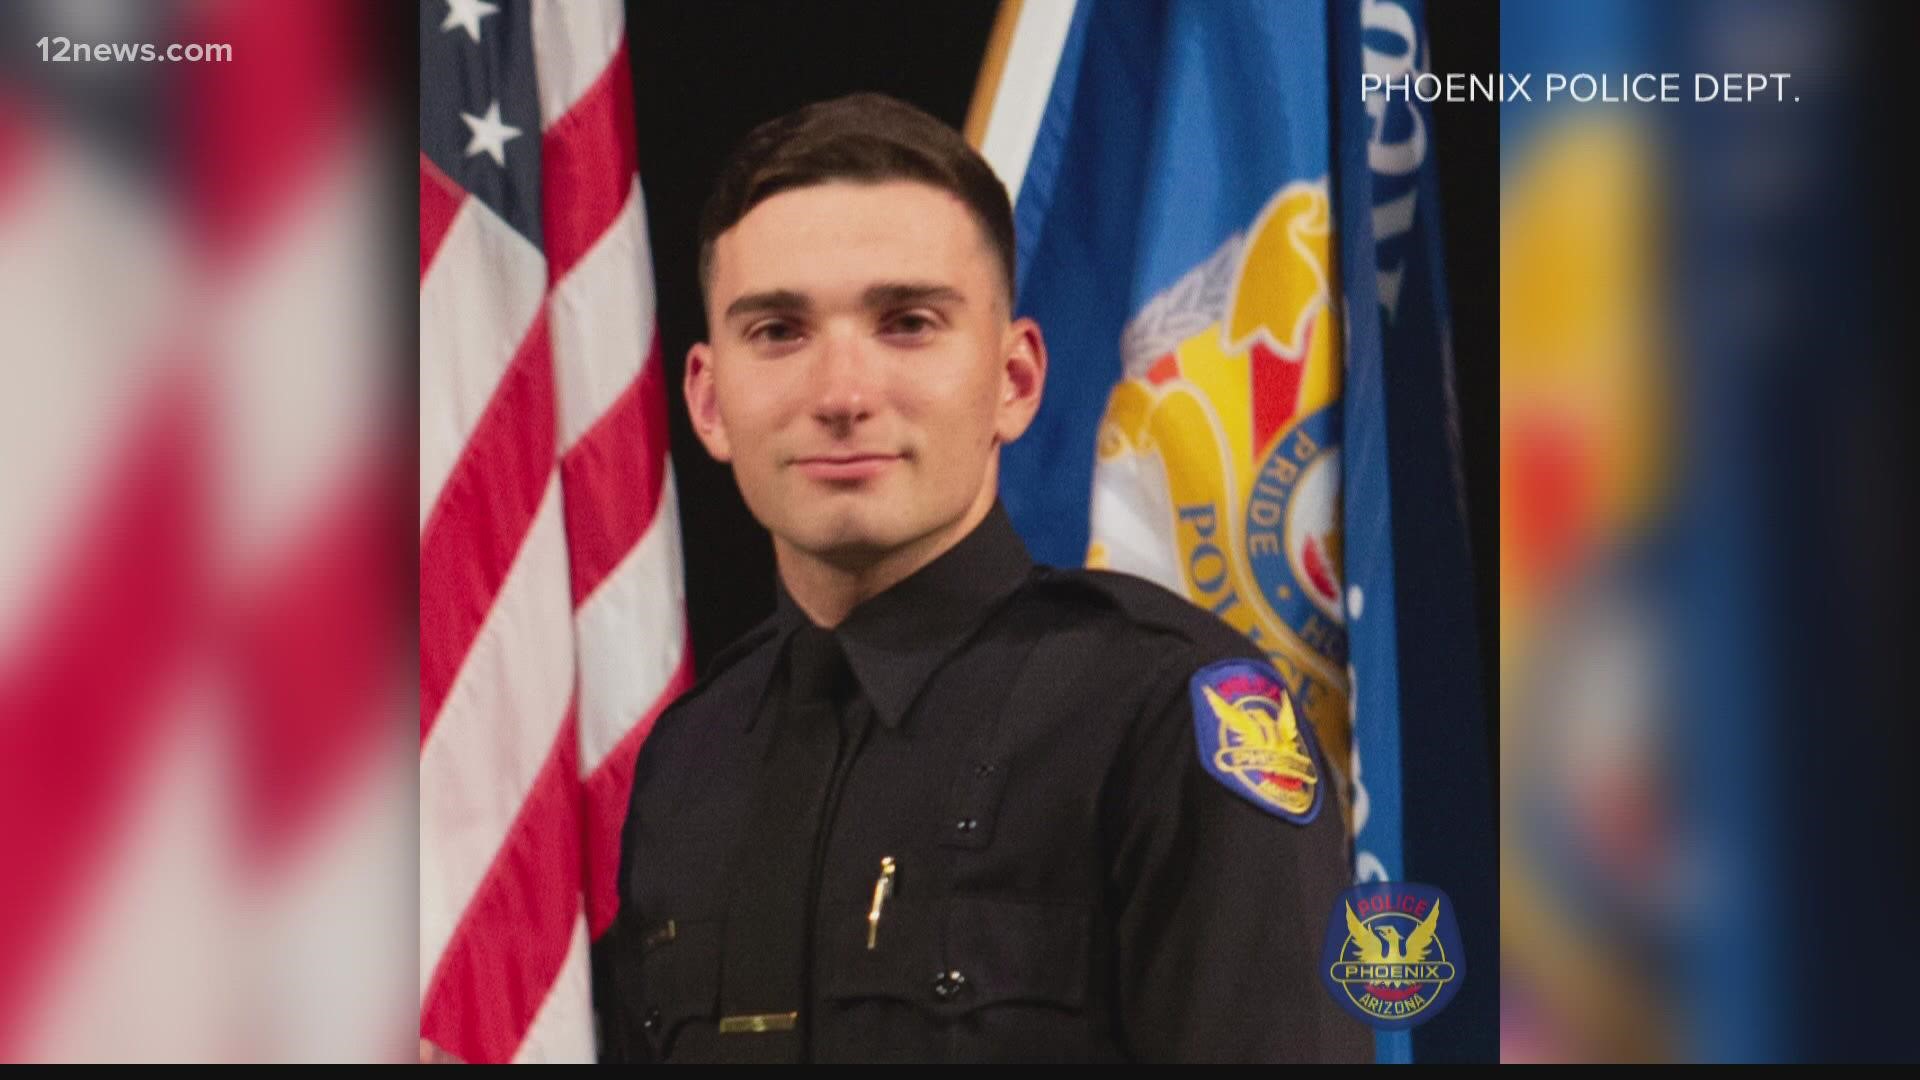 One week ago, Officer Tyler Moldovan was shot eight times while looking for a suspect. The community and fellow police officers continue to rally around Tyler.